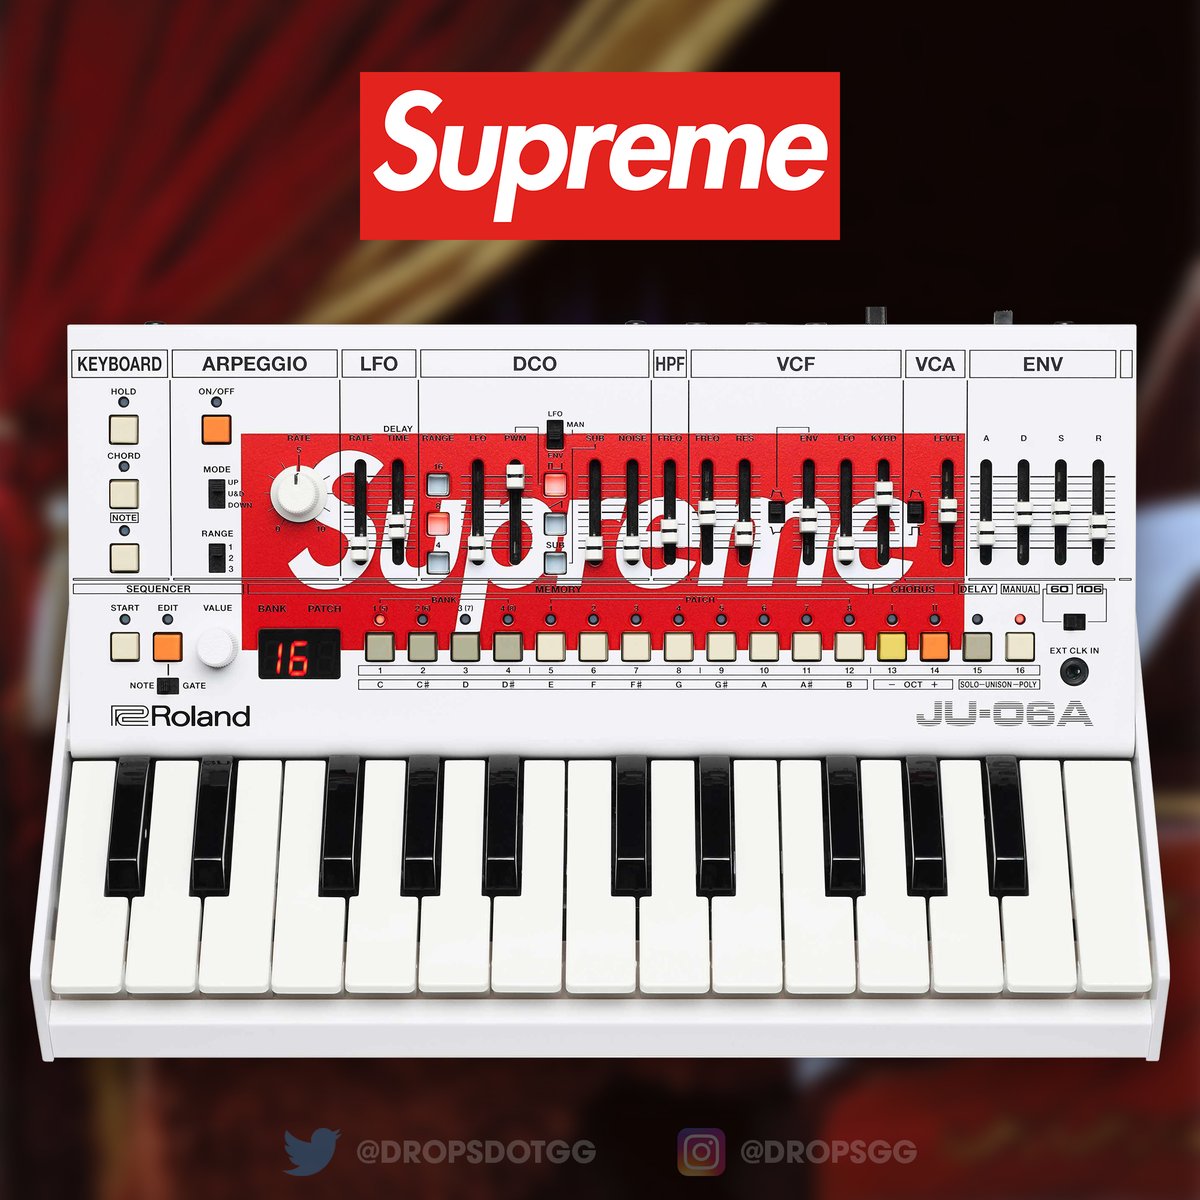 Supreme/Roland JU-06A Synthesizer & TR-08 Rhythm Composer are set to release this week 🎹🔥

Details:

Synthesizer -  Compact, portable synth module based on archival JUNO-60 and JUNO-106 synthesizers. 17 dedicated sliders and 16-step sequencer. Built-in K-25m keyboard unit and…